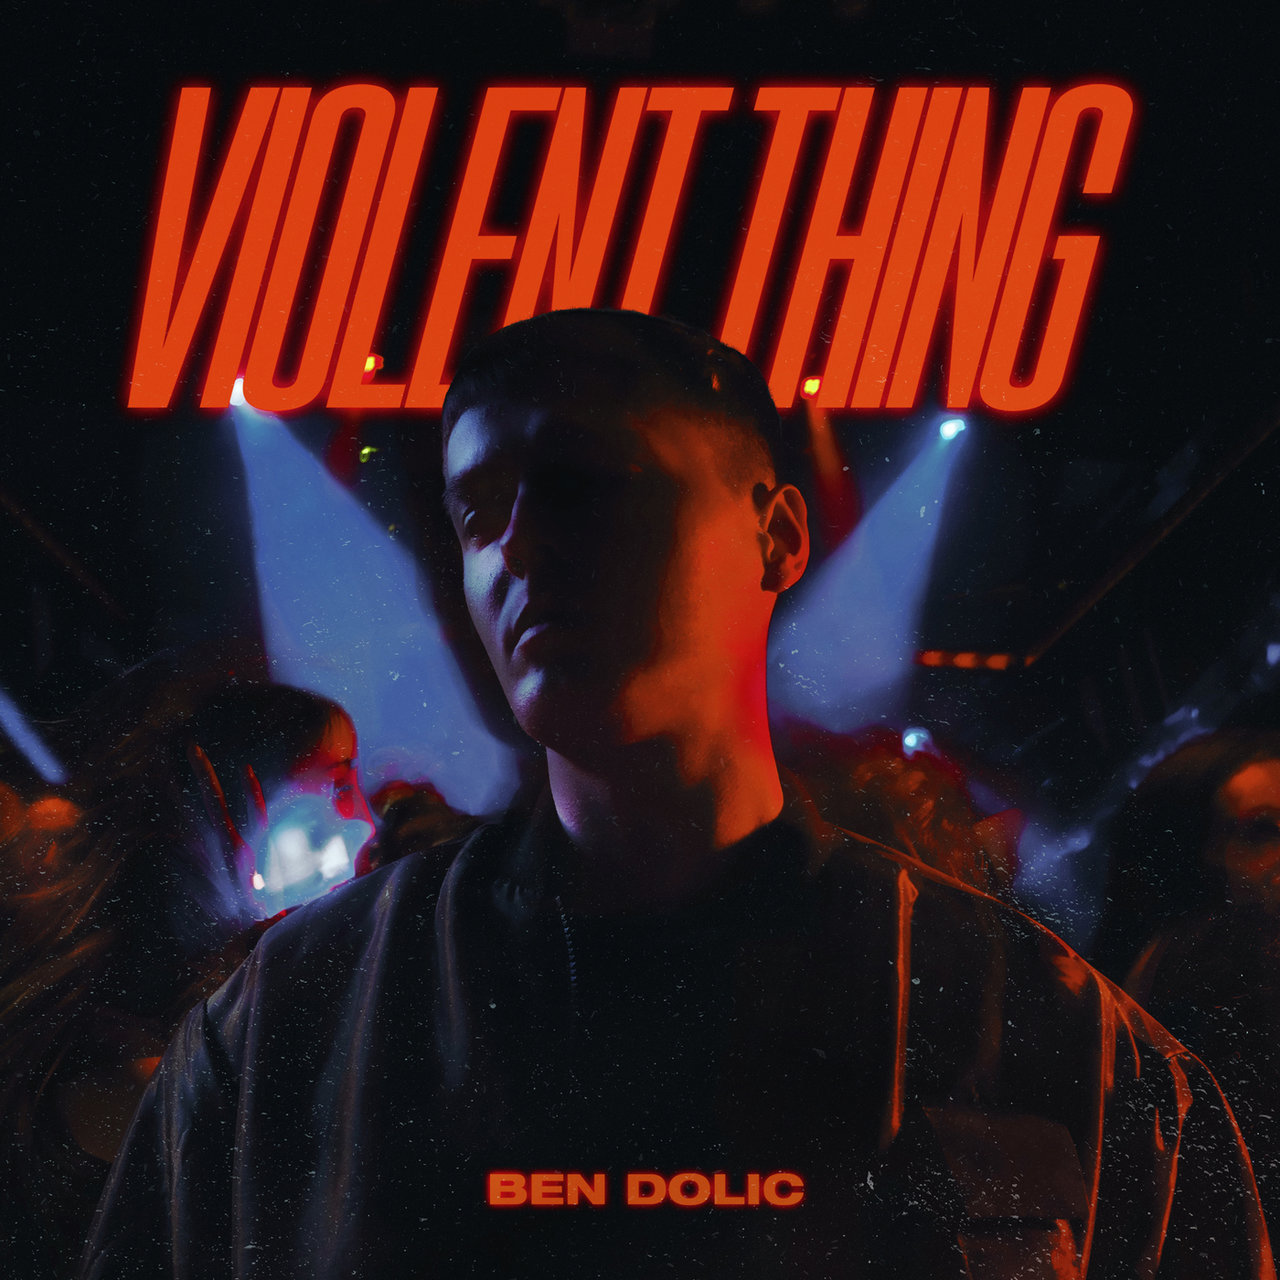 Ben Dolic ft. featuring B-OK Violent Thing cover artwork